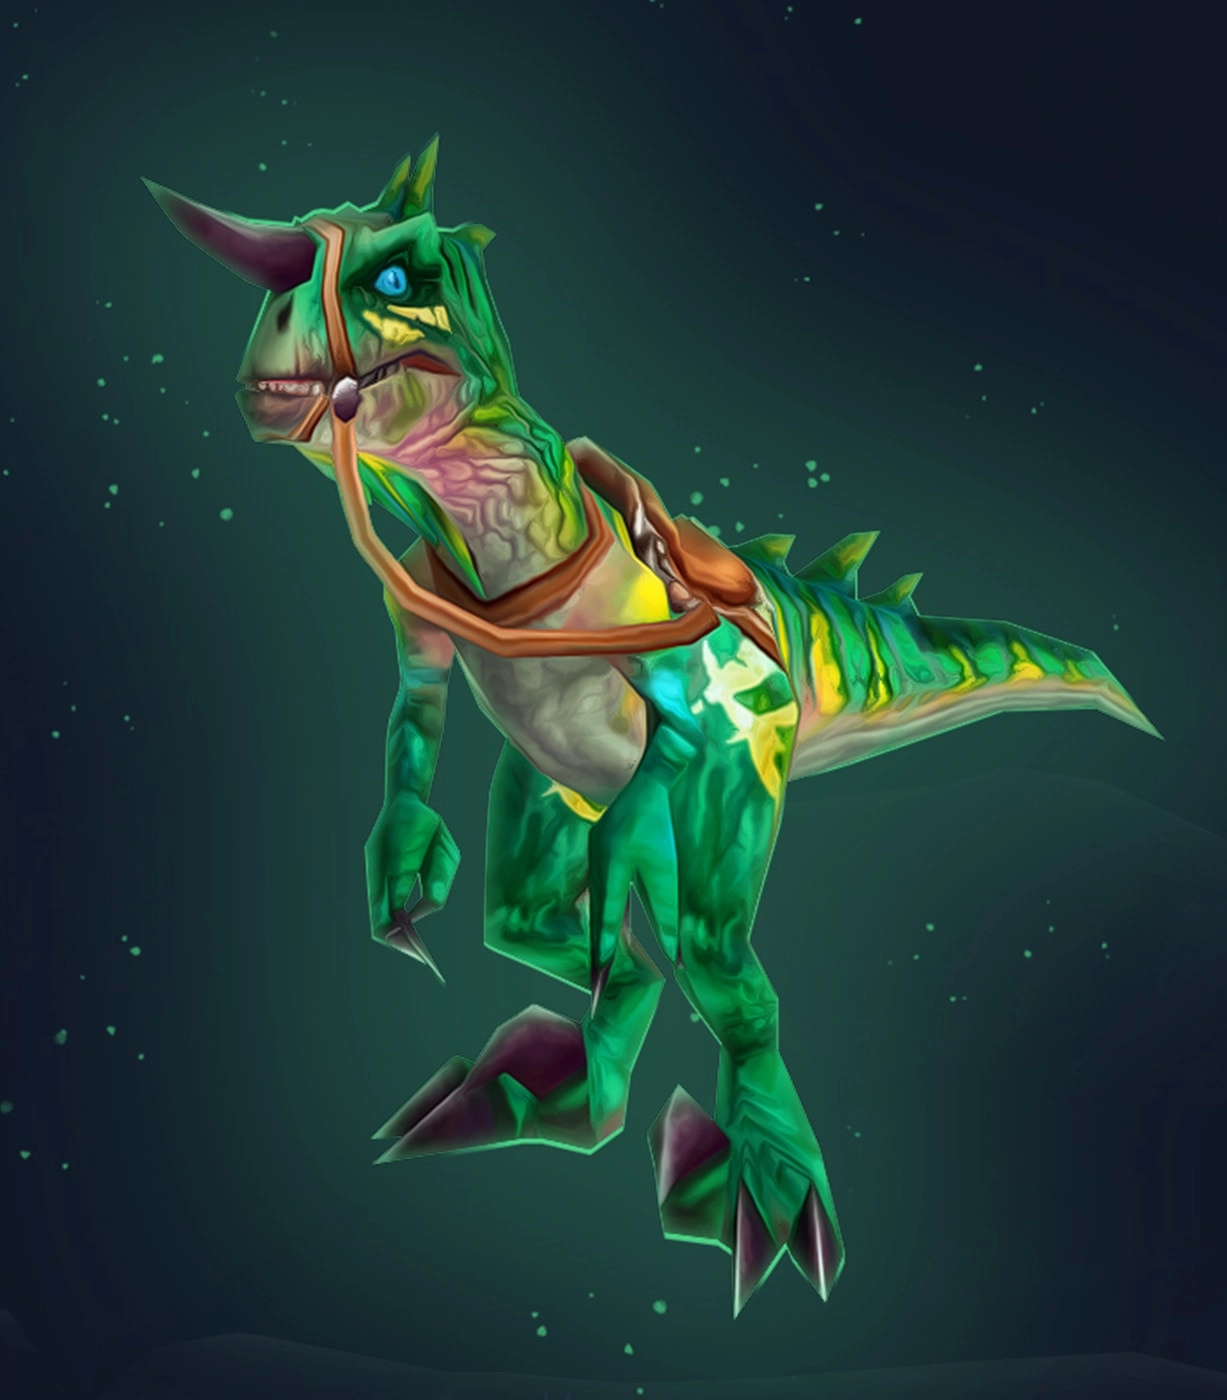 Whistle of the Emerald Raptor Mount